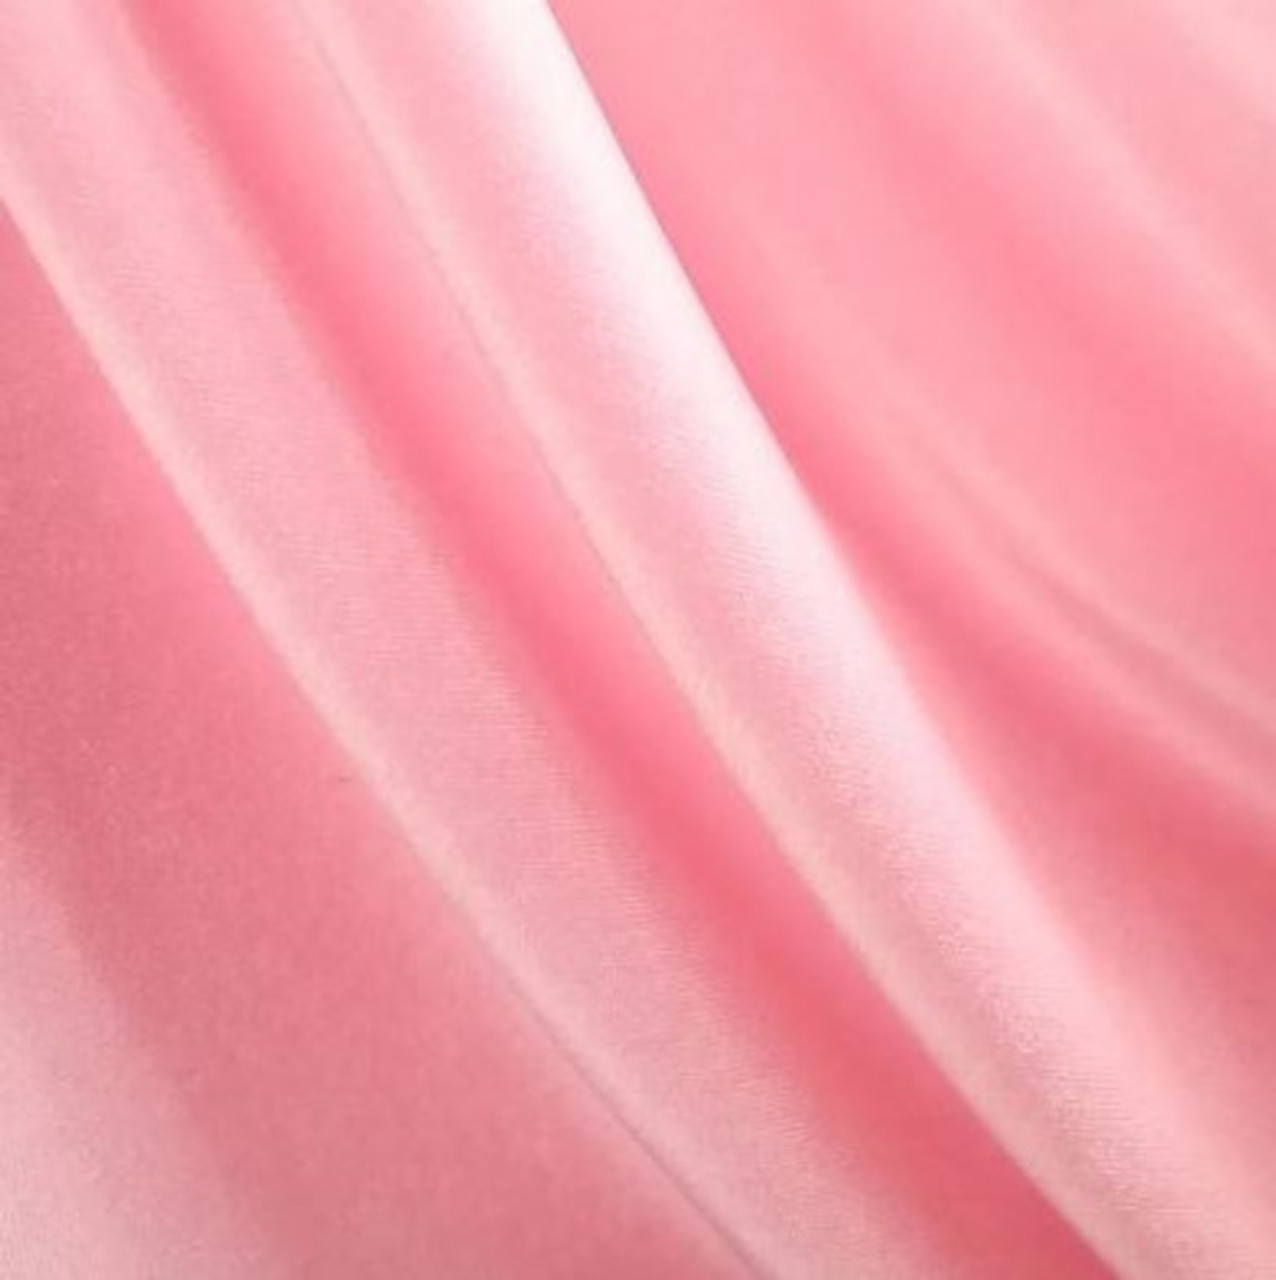 Hot Pink Crushed Stretch Velvet Fabric